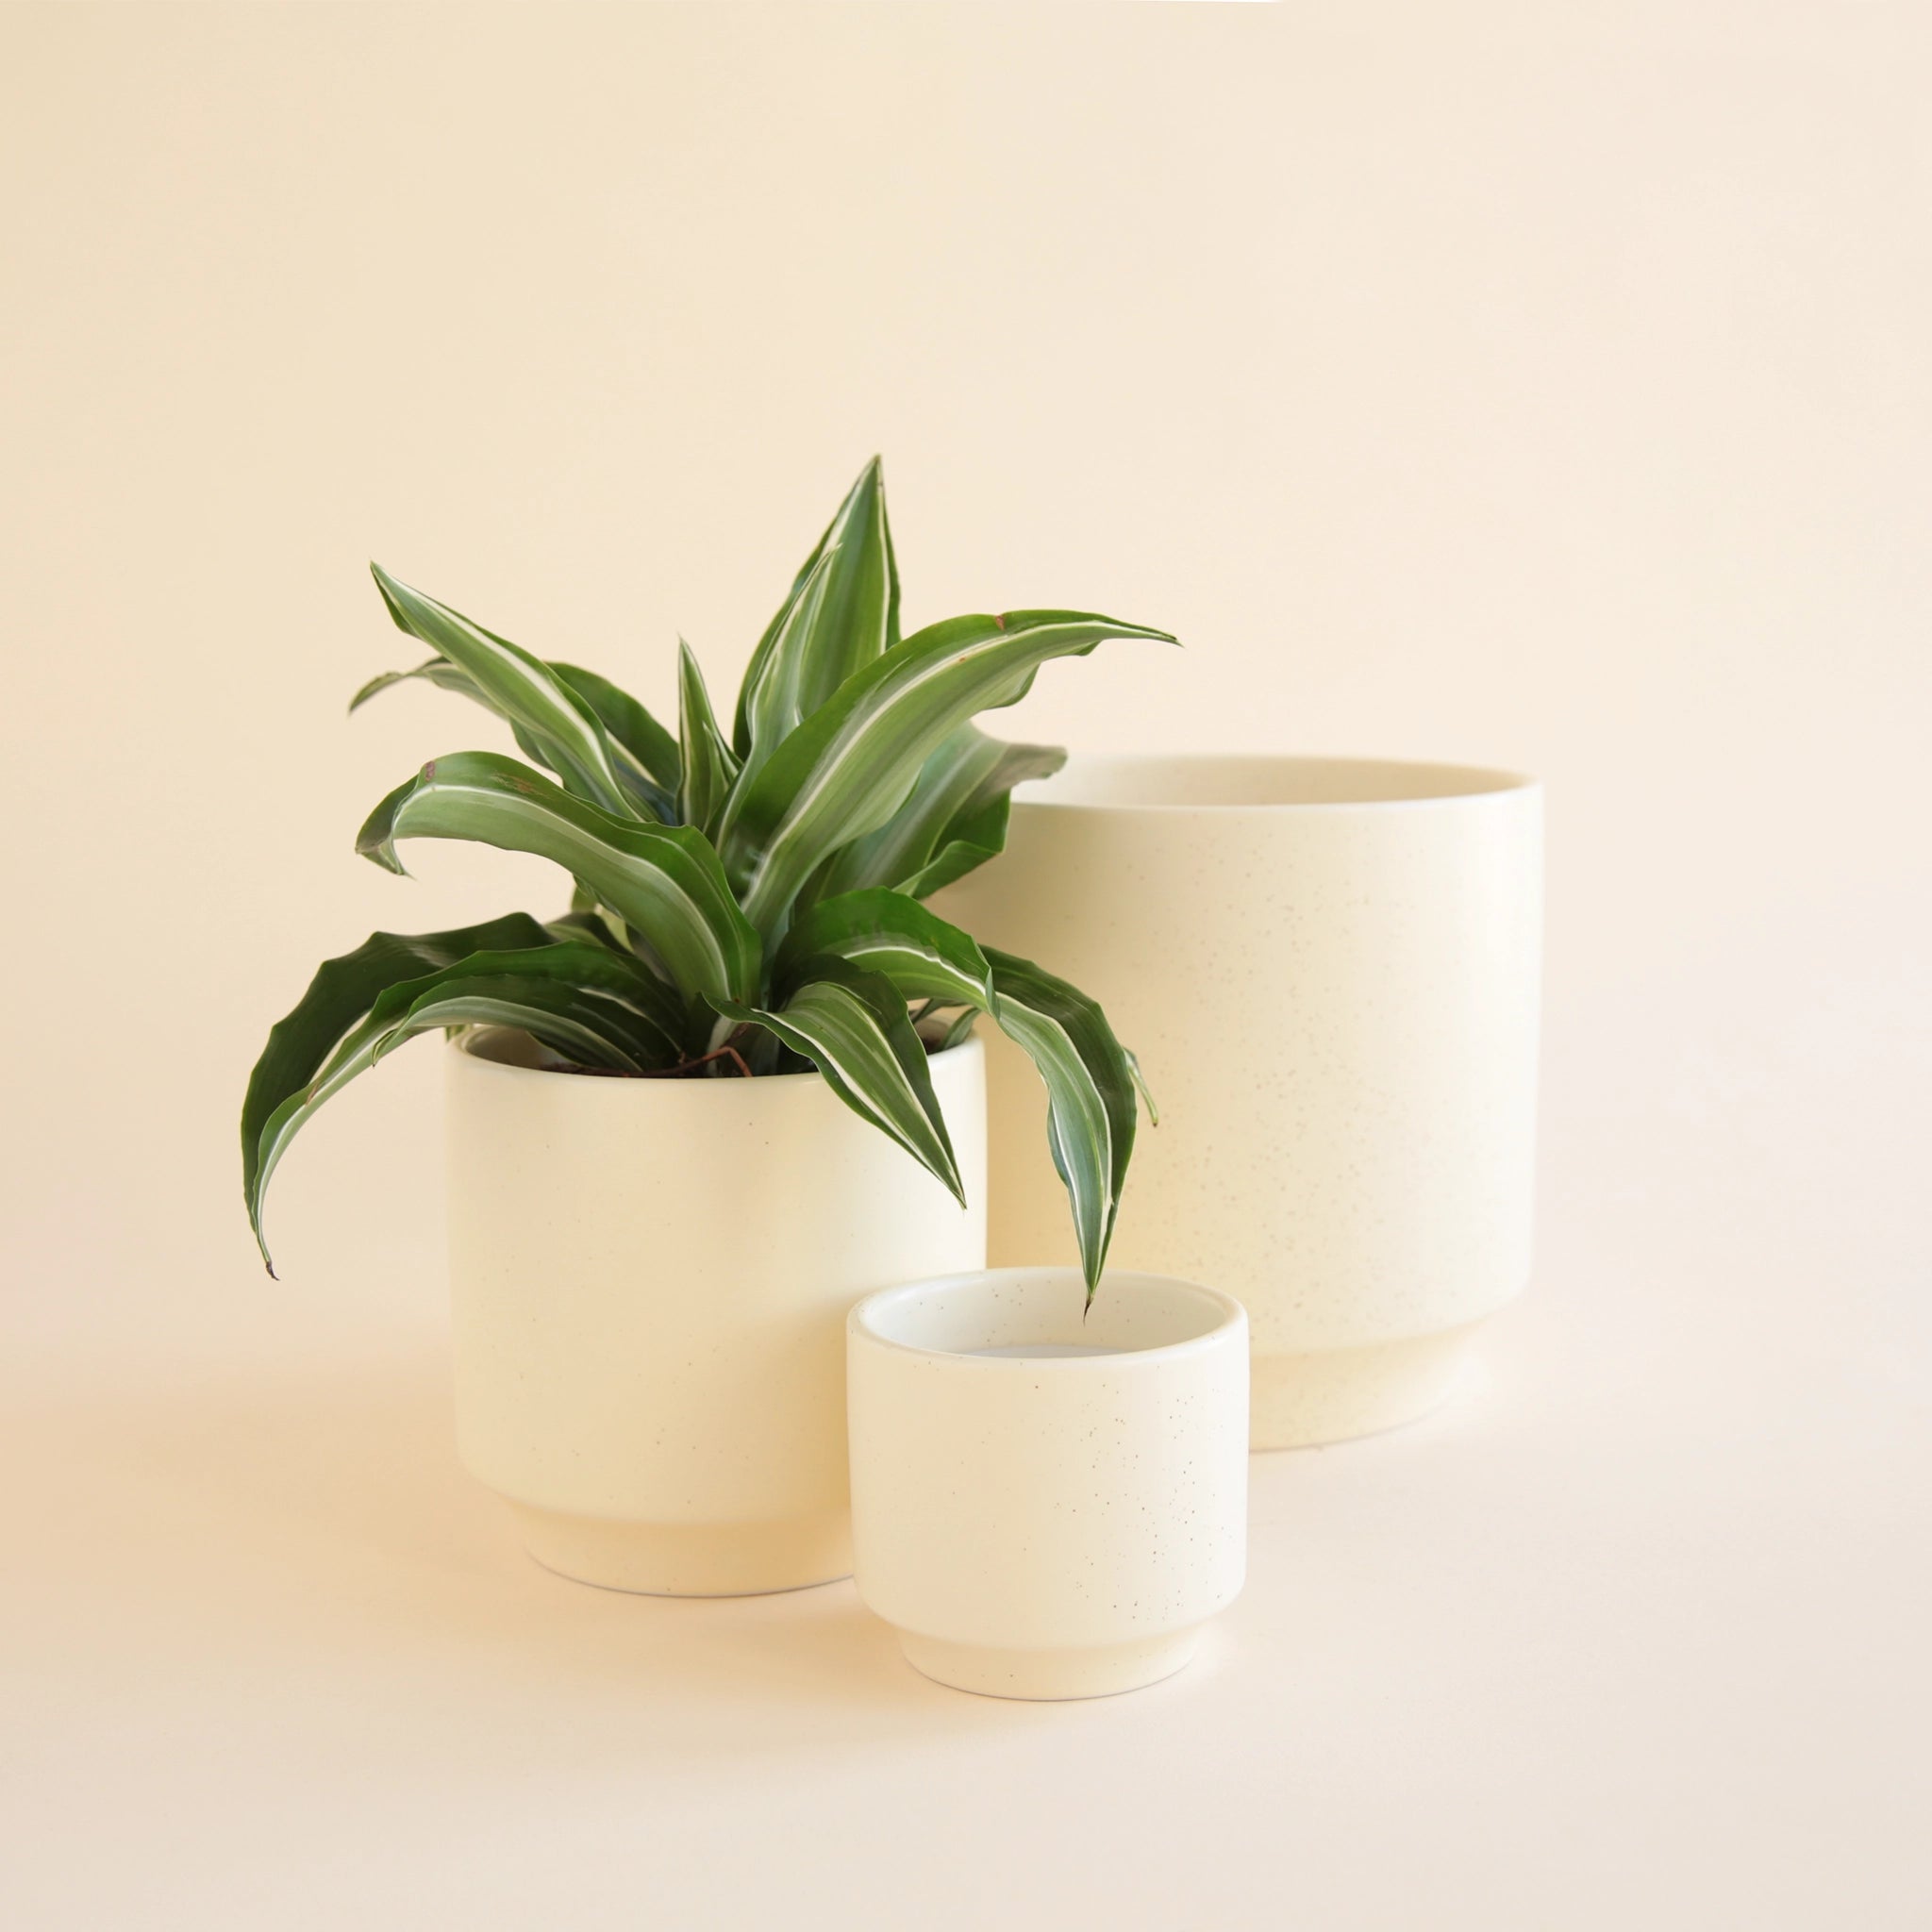 On an ivory background is three different sized ceramic pots in a neutral ivory color with slight speckling and a tapered bottom.